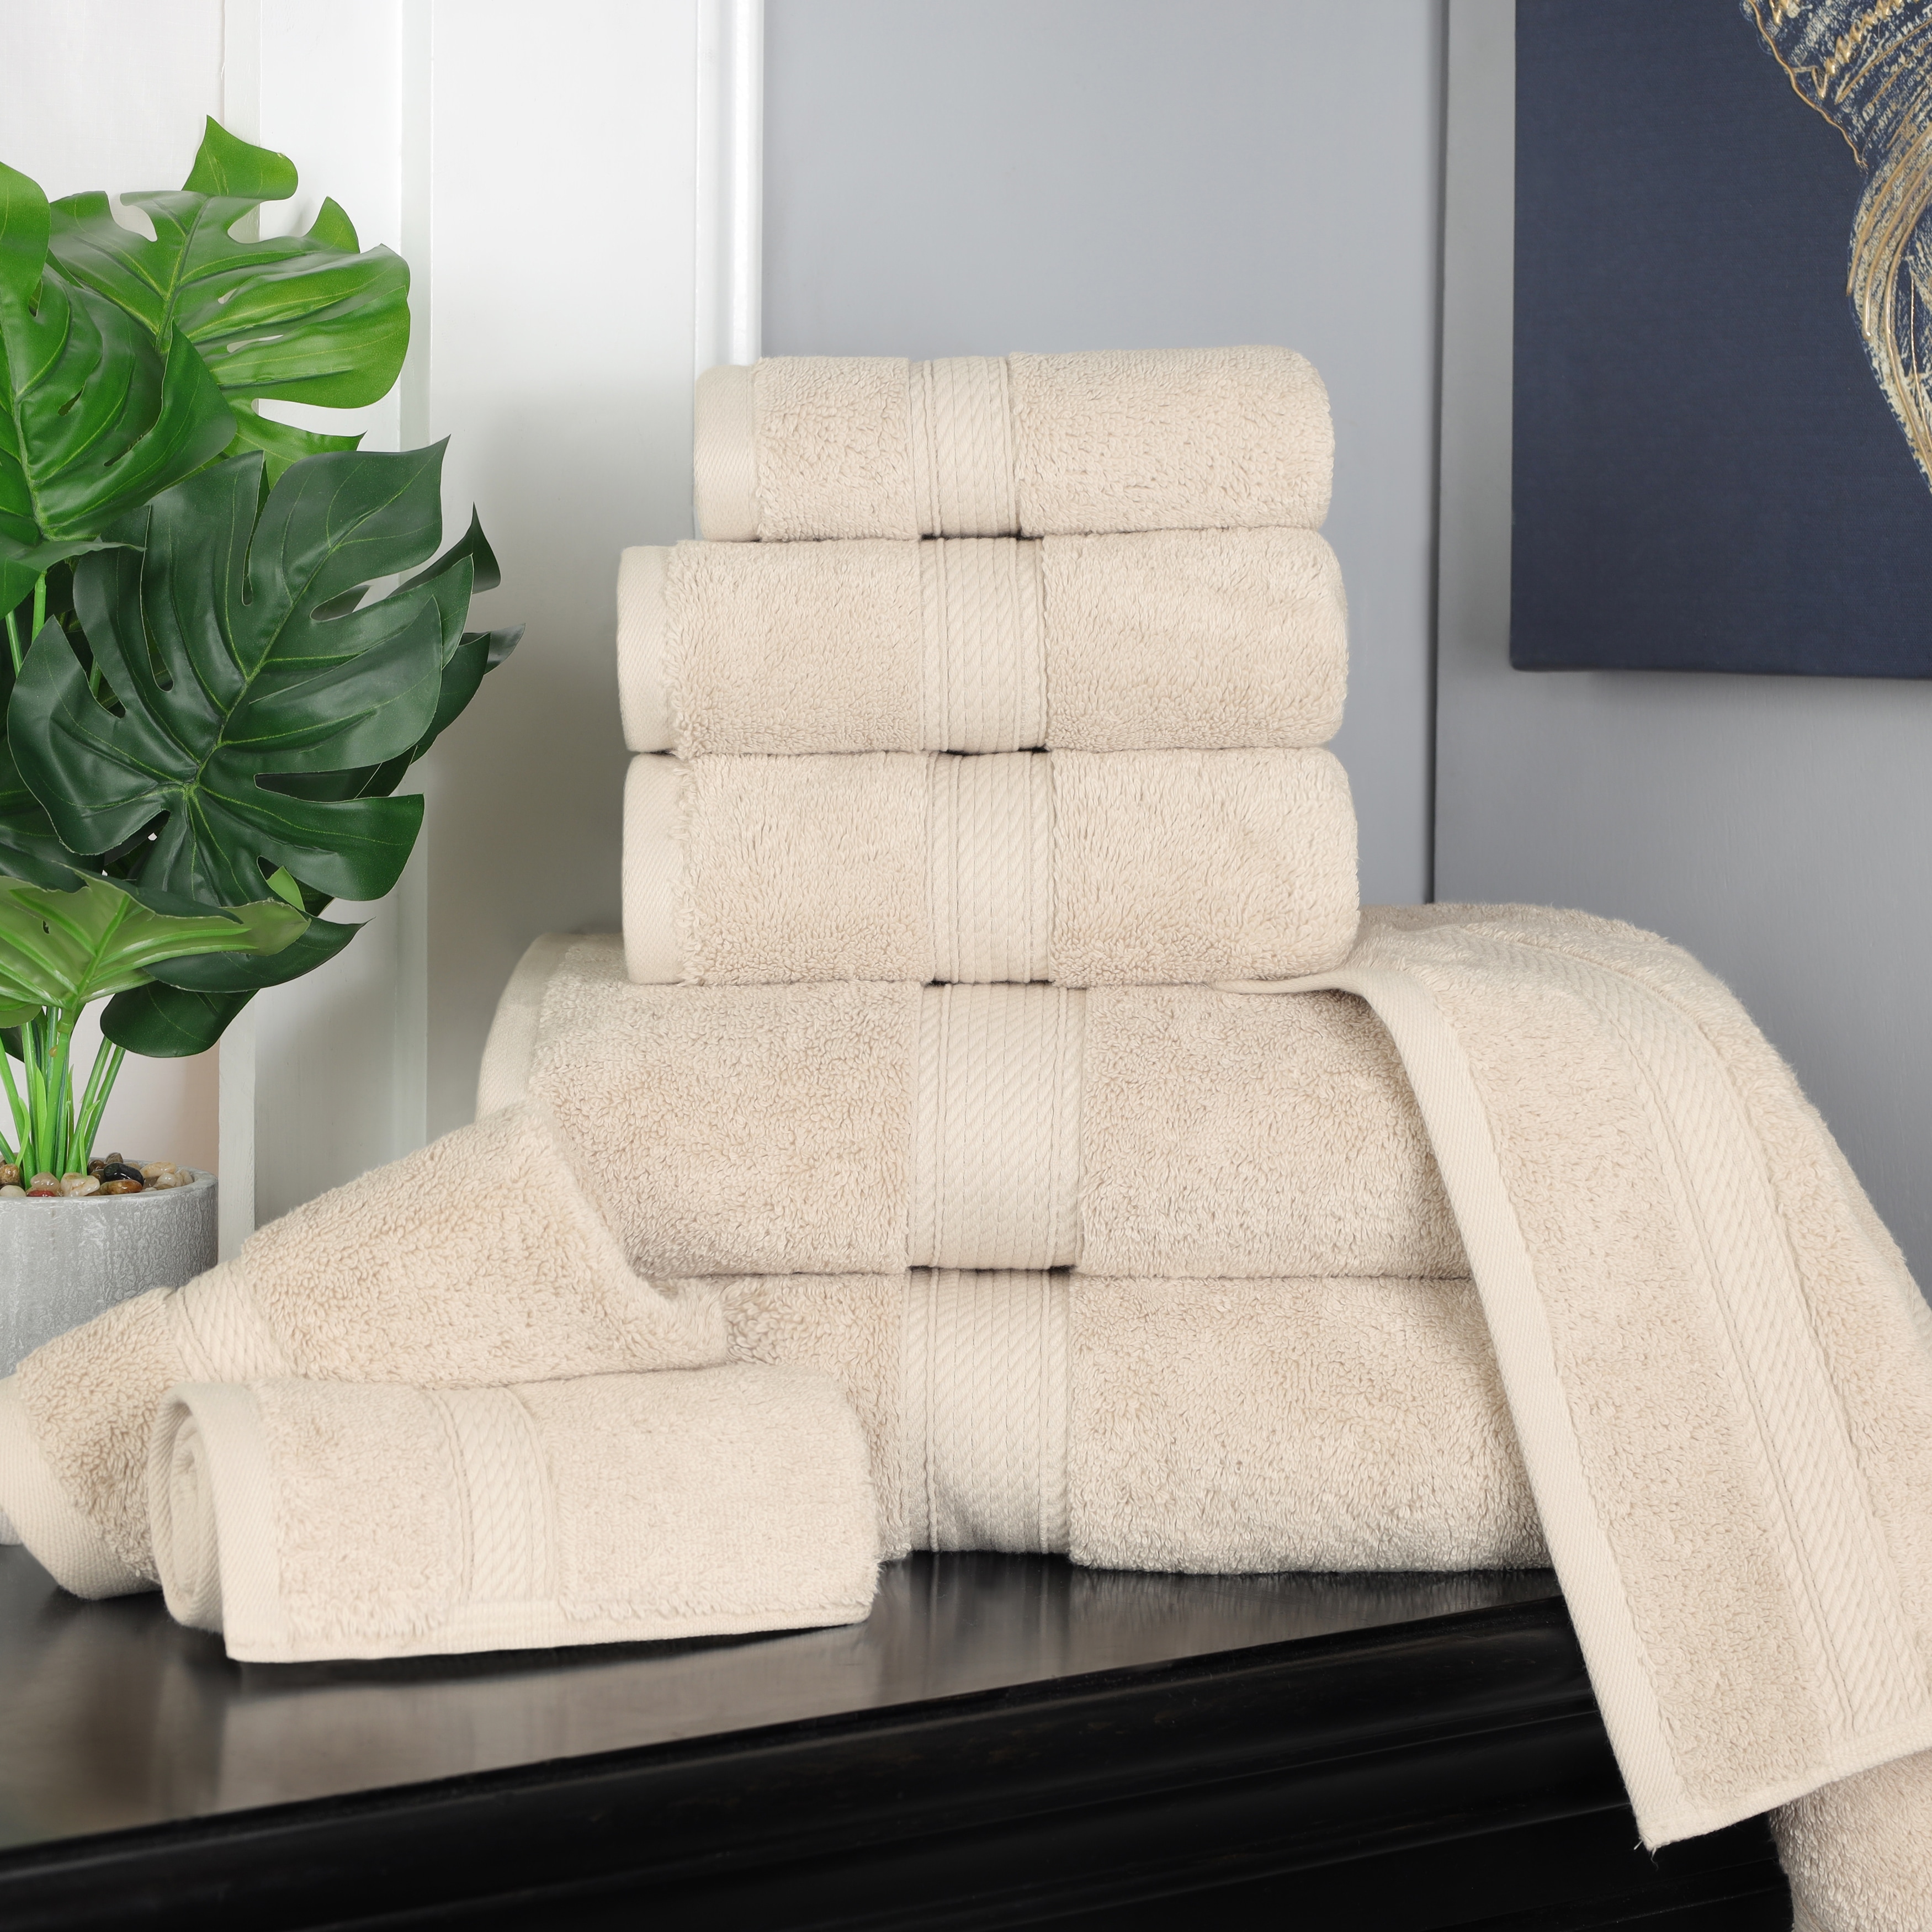 https://ak1.ostkcdn.com/images/products/is/images/direct/f73d3341ff9d0331f60f211059467d0c5ec17a23/Superior-Egyptian-Cotton-Highly-Absorbent-8-Piece-Solid-Towel-Set.jpg